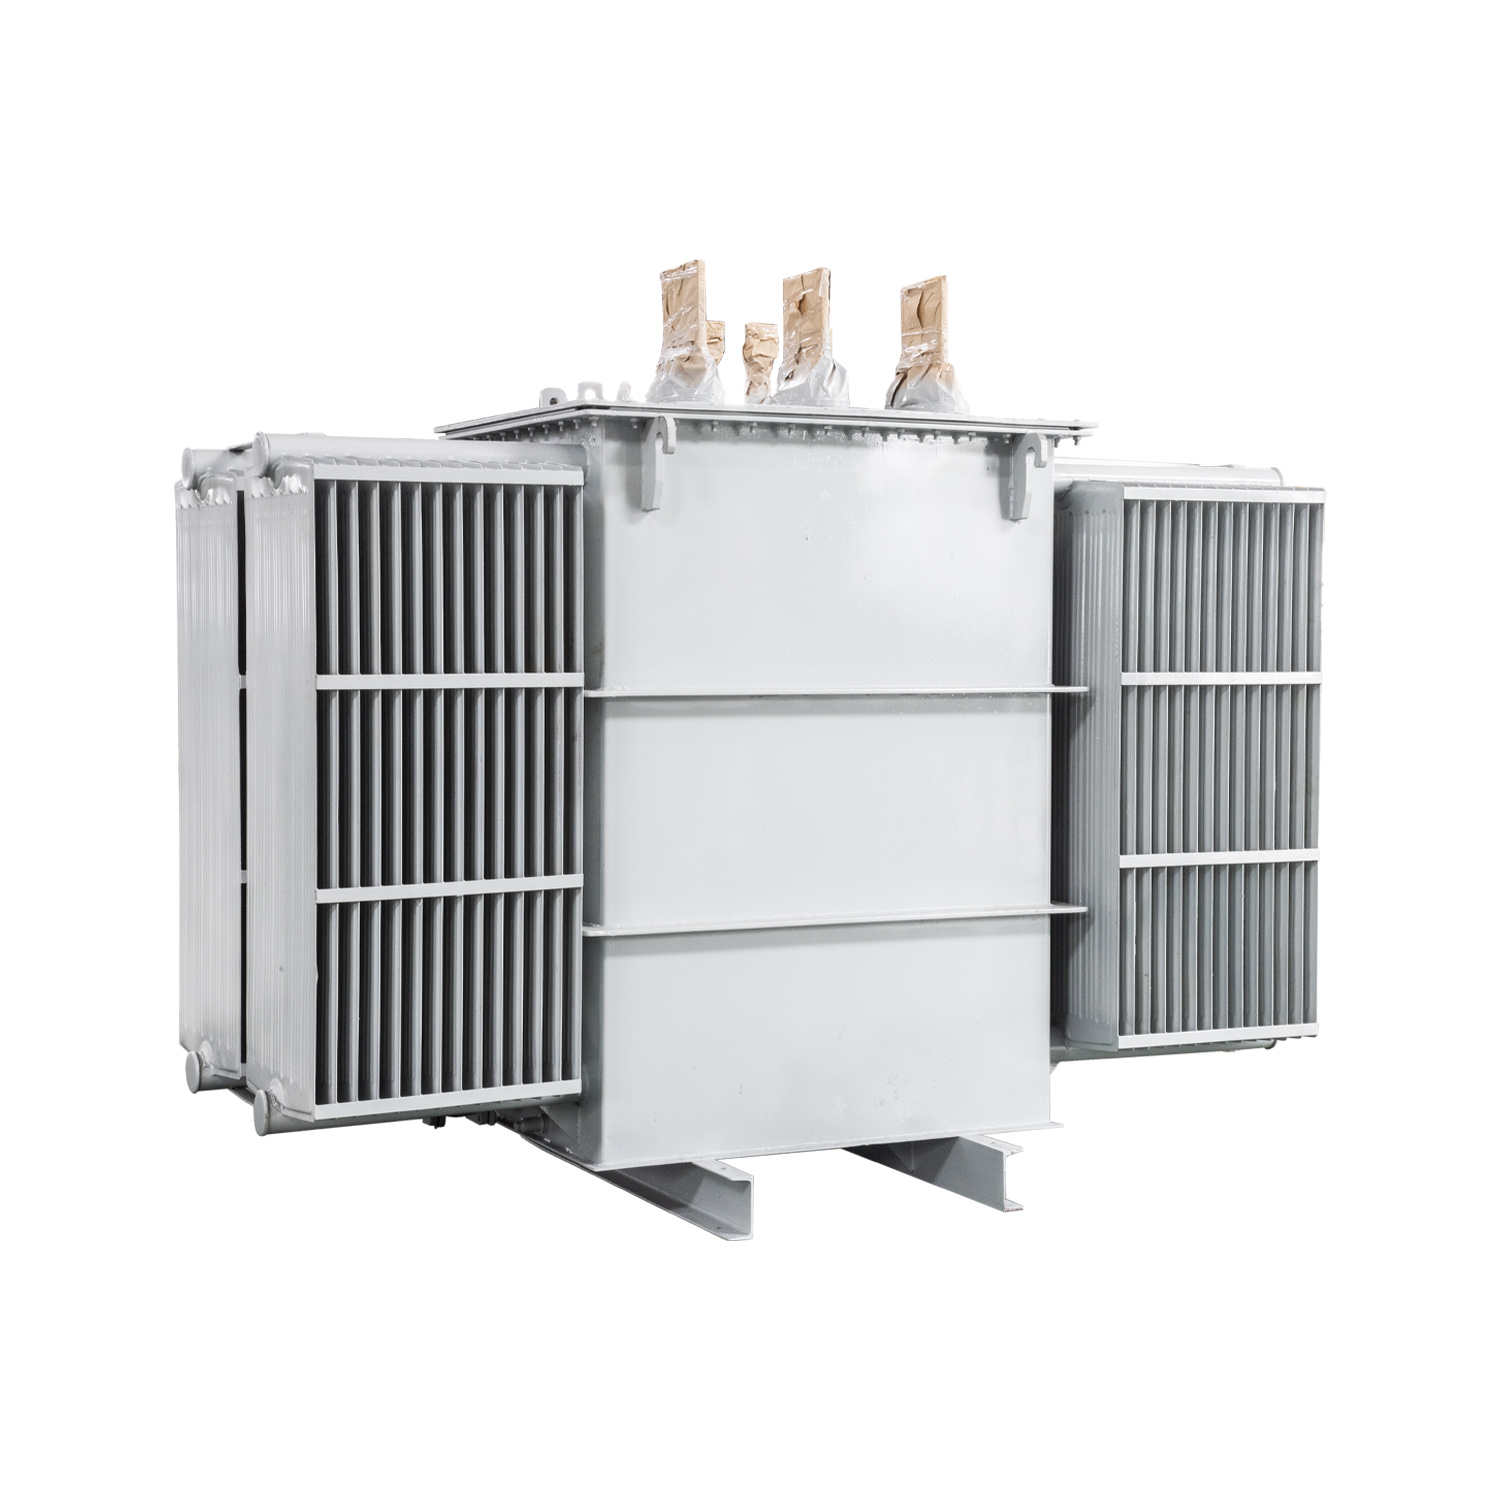 ISO9001 315 kVA thermal processing magnetic voltage regulator